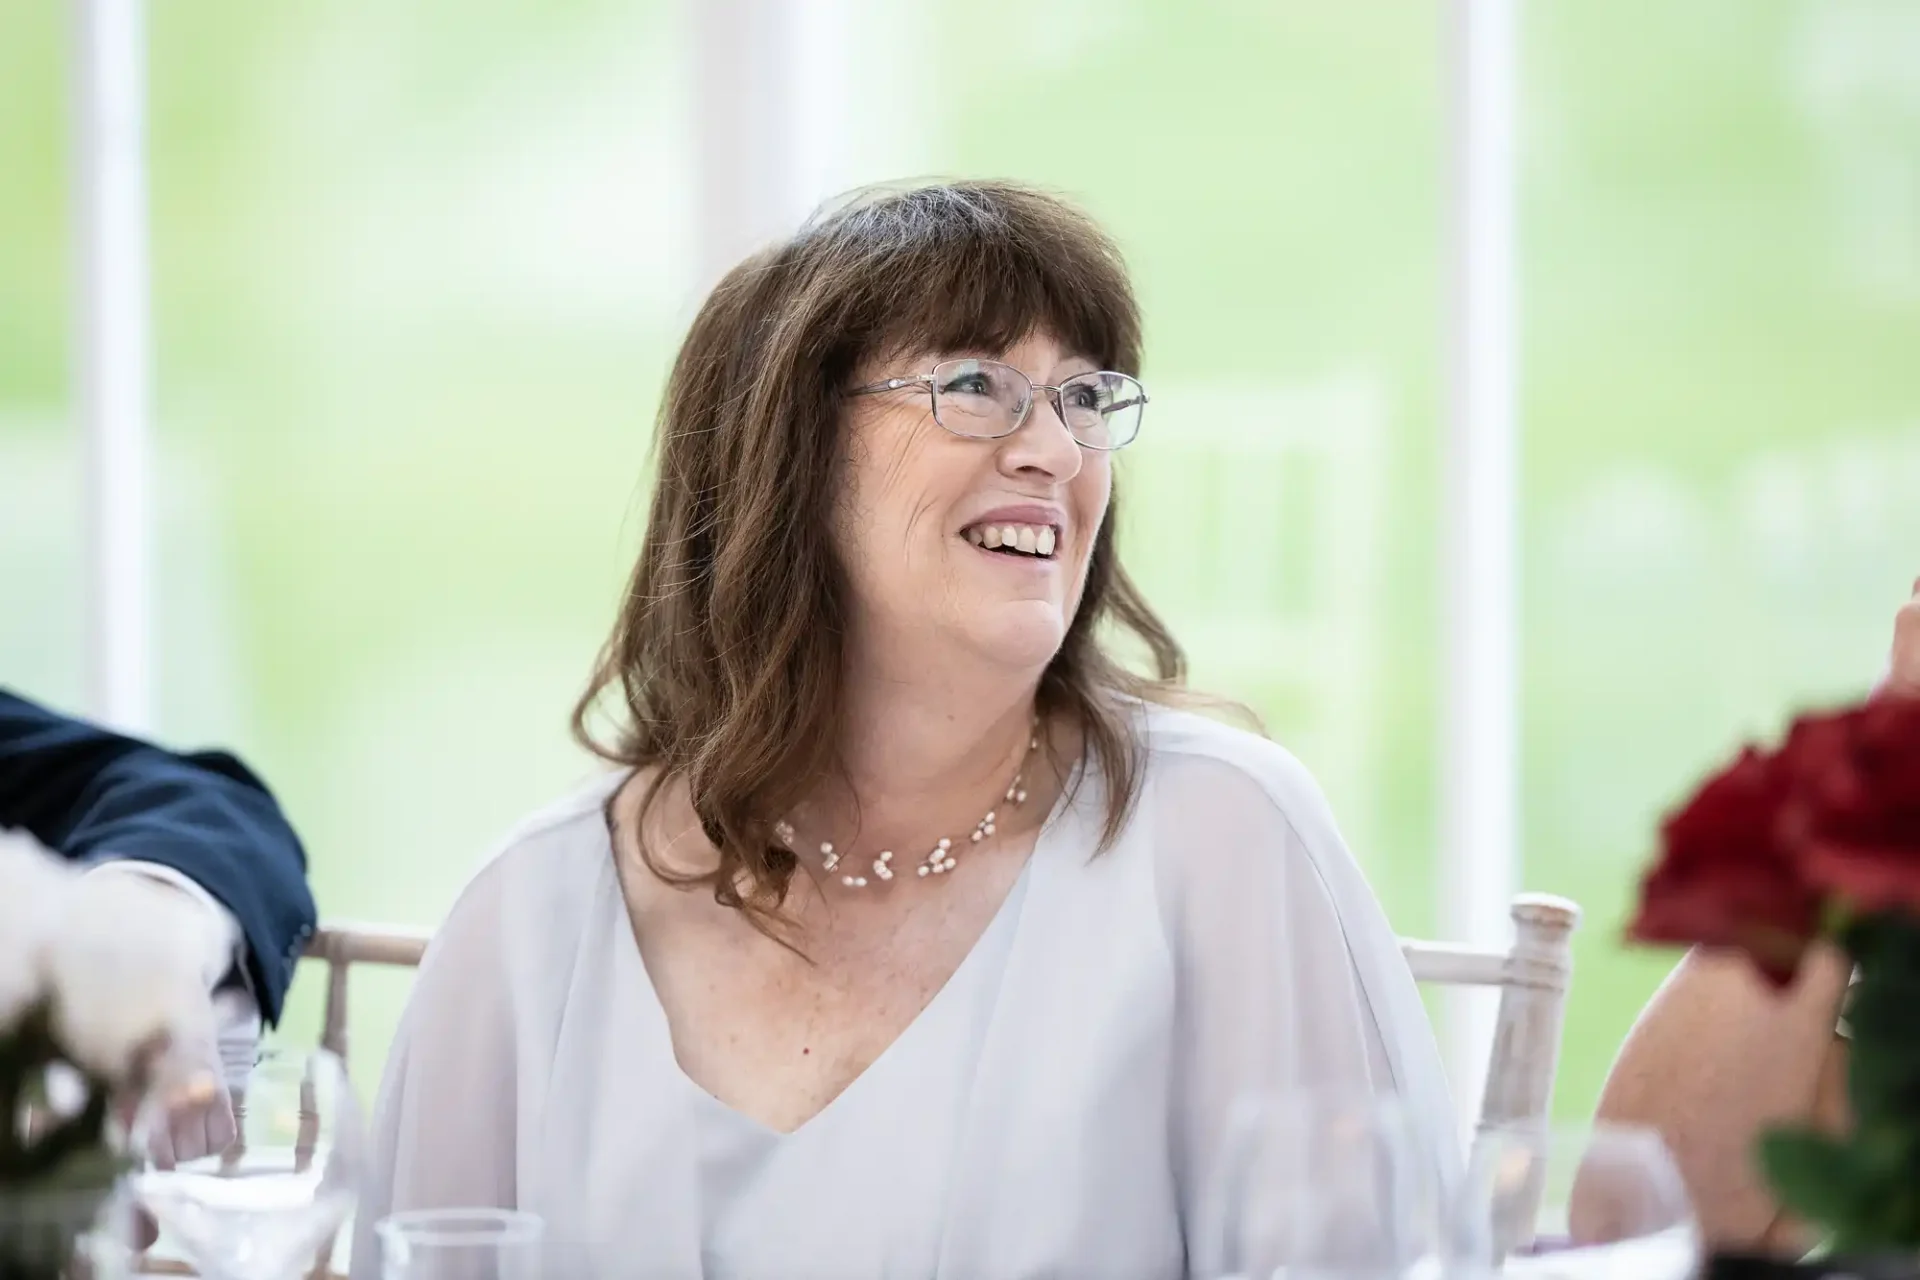 A middle-aged woman with brown hair and glasses, wearing a white blouse, smiles while seated at a table during an event.